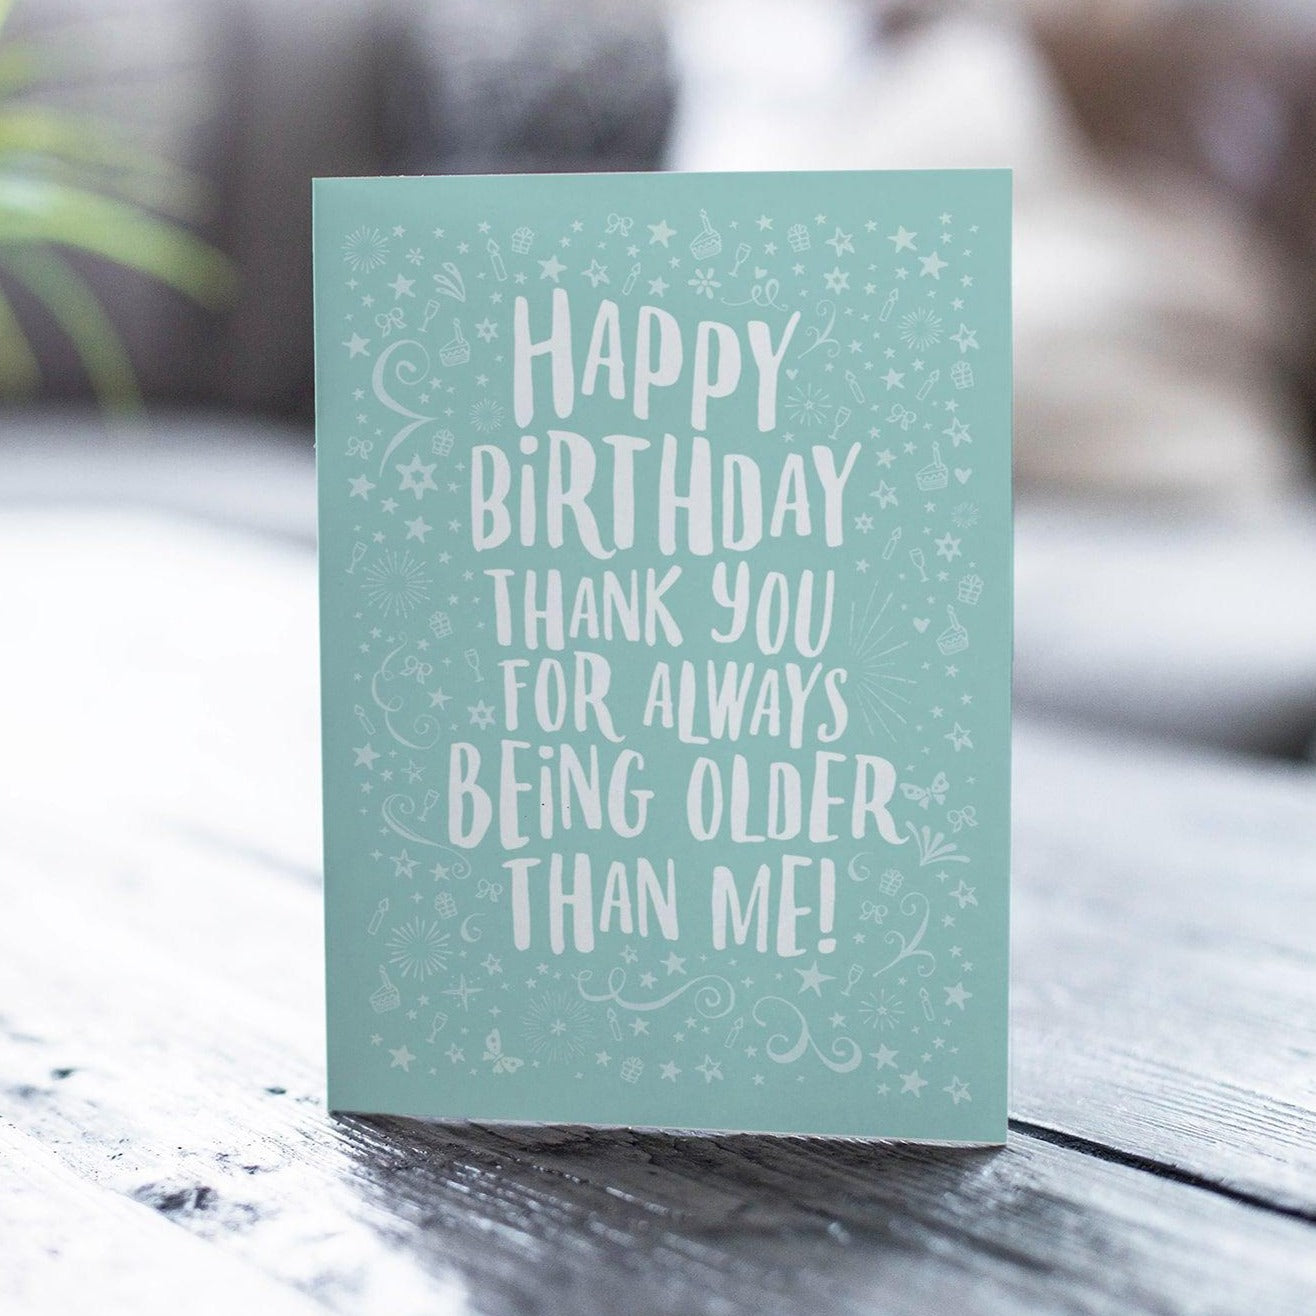 Happy Birthday thank you for always being older than me! birthday card on table 